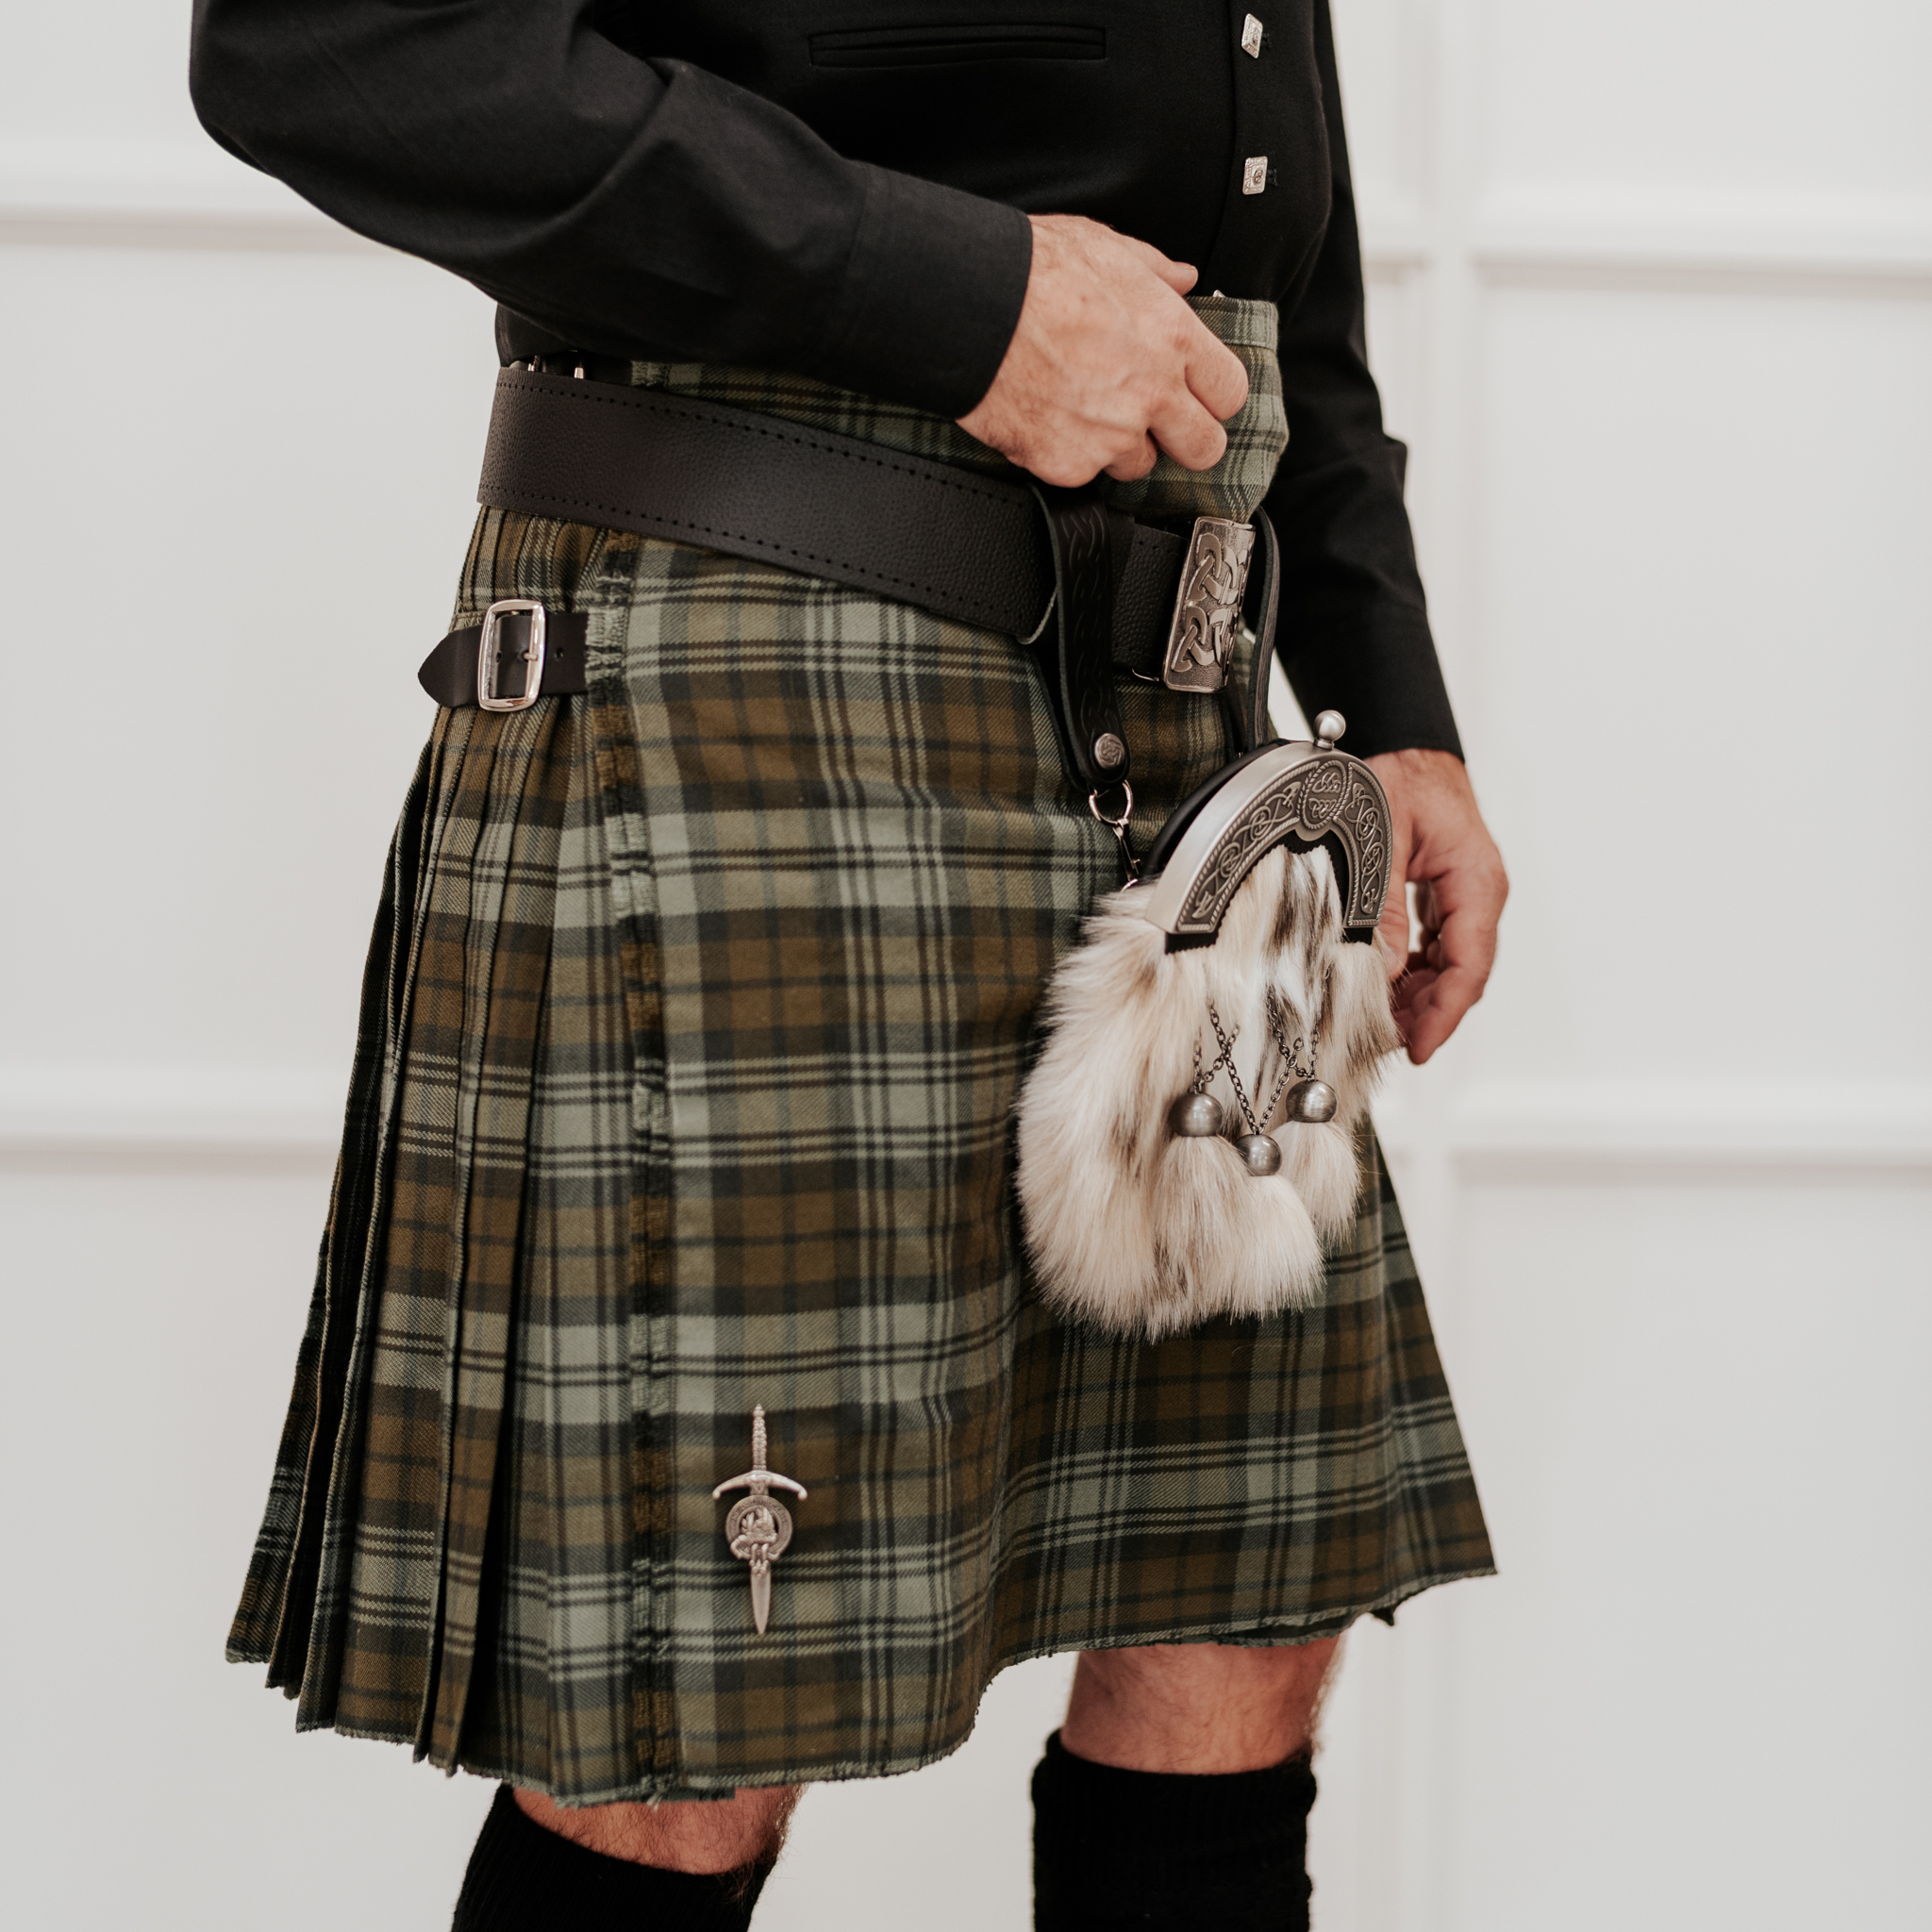 Largest of - online Selection for Order kilt today your available sale Kilts